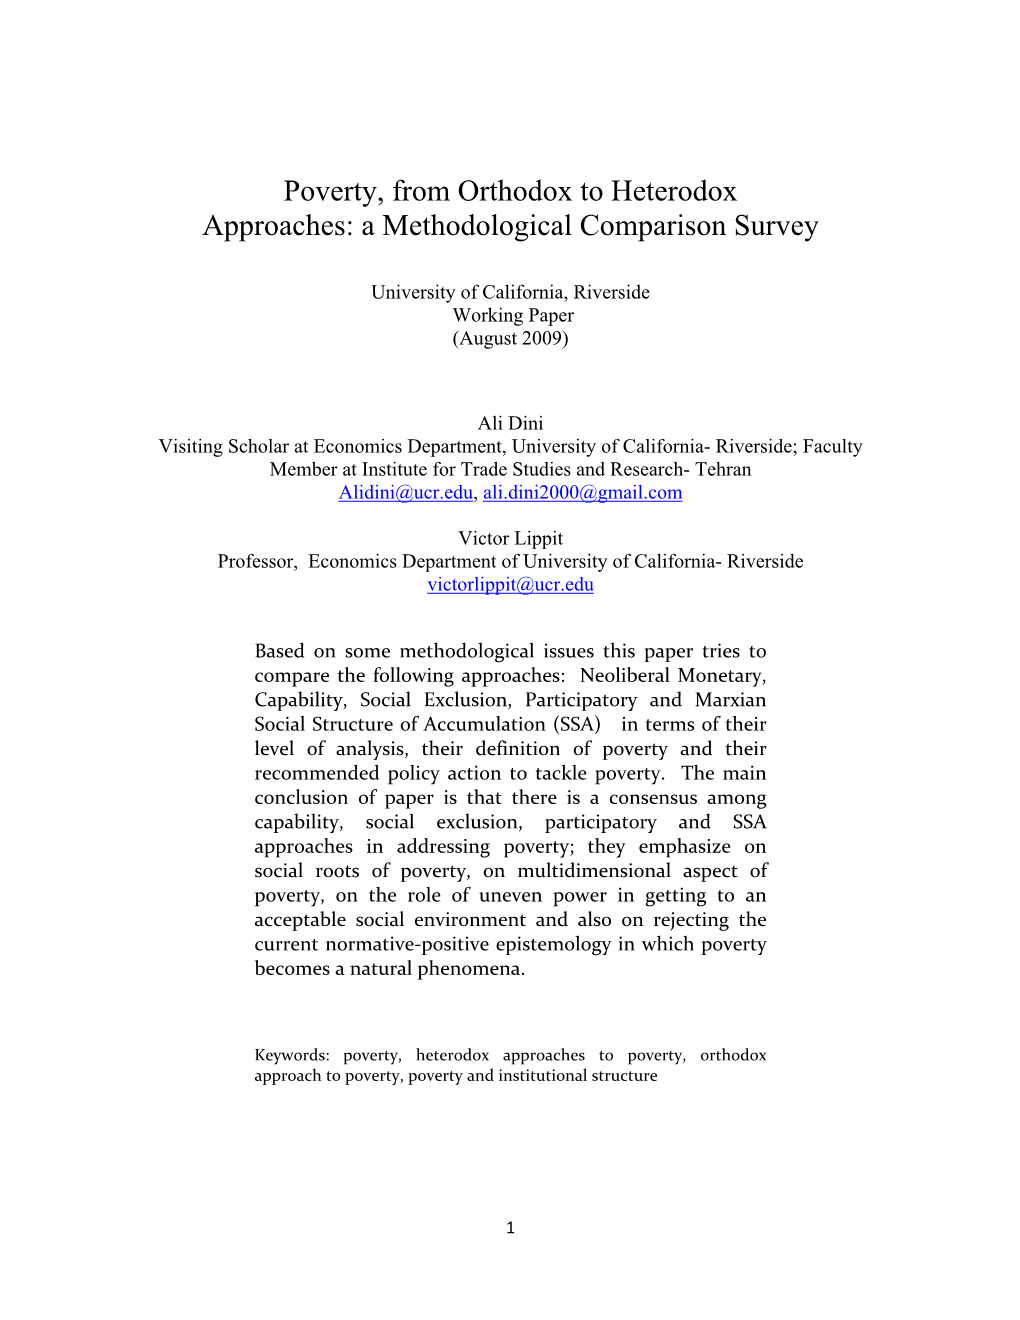 Competitive Approaches to Poverty